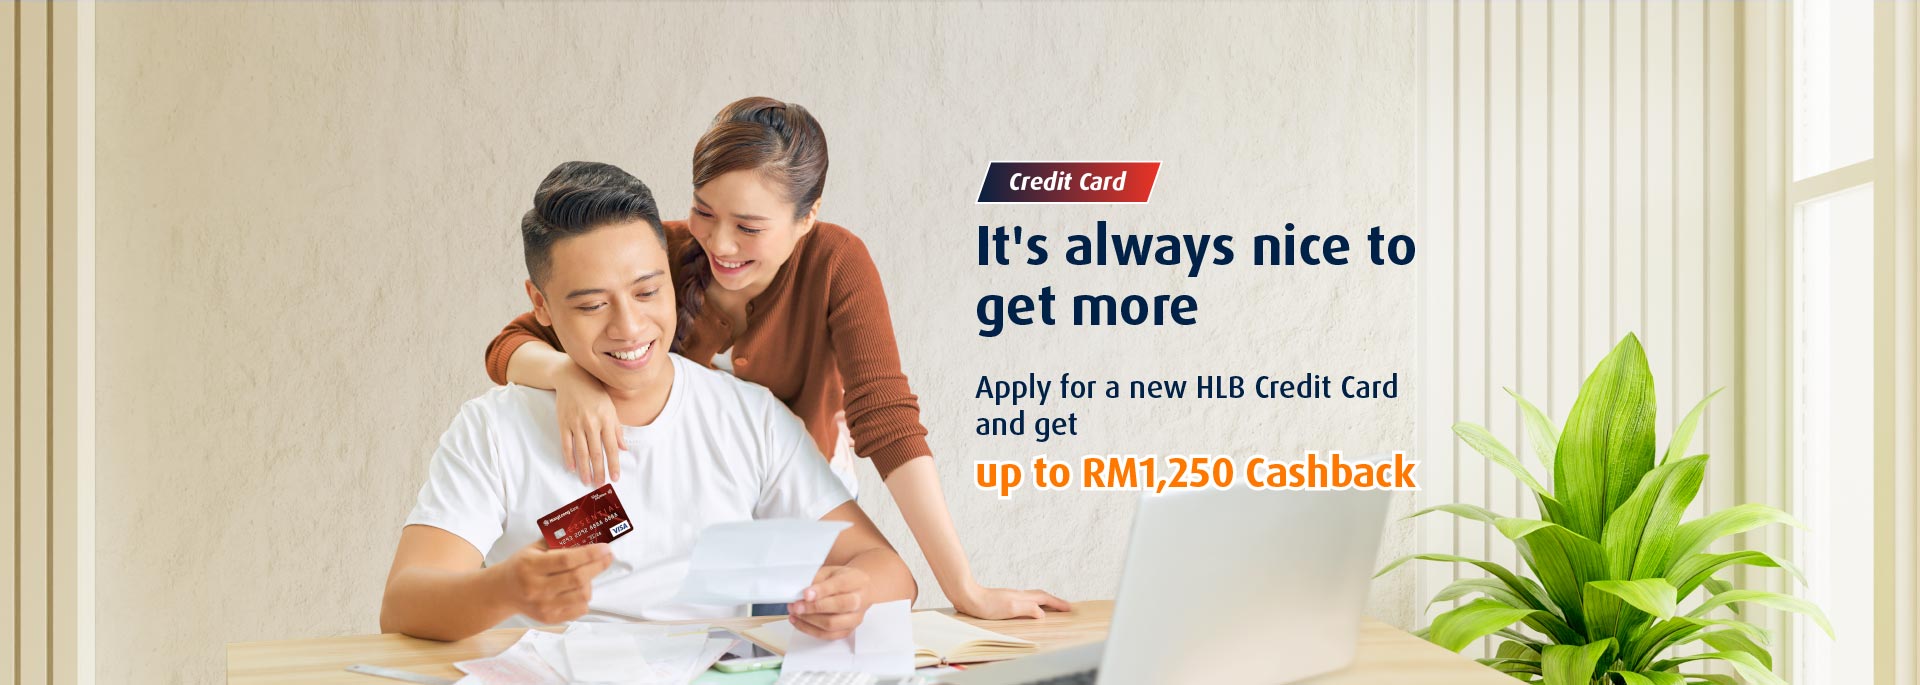 Get up to RM1250 Cashback with your new HLB Credit Card